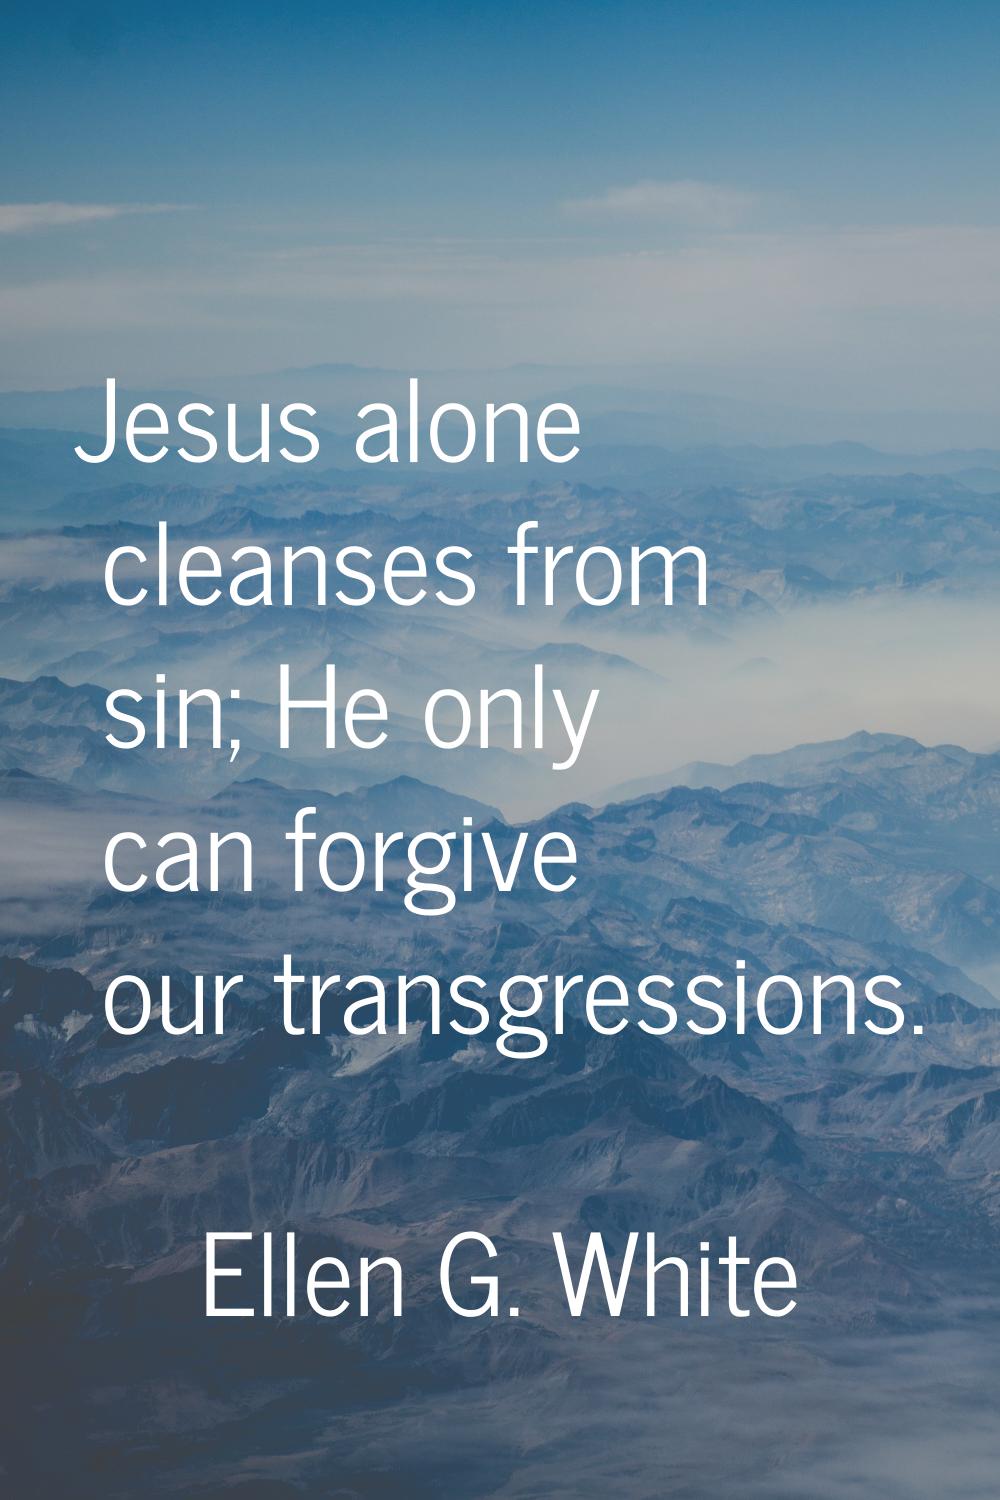 Jesus alone cleanses from sin; He only can forgive our transgressions.